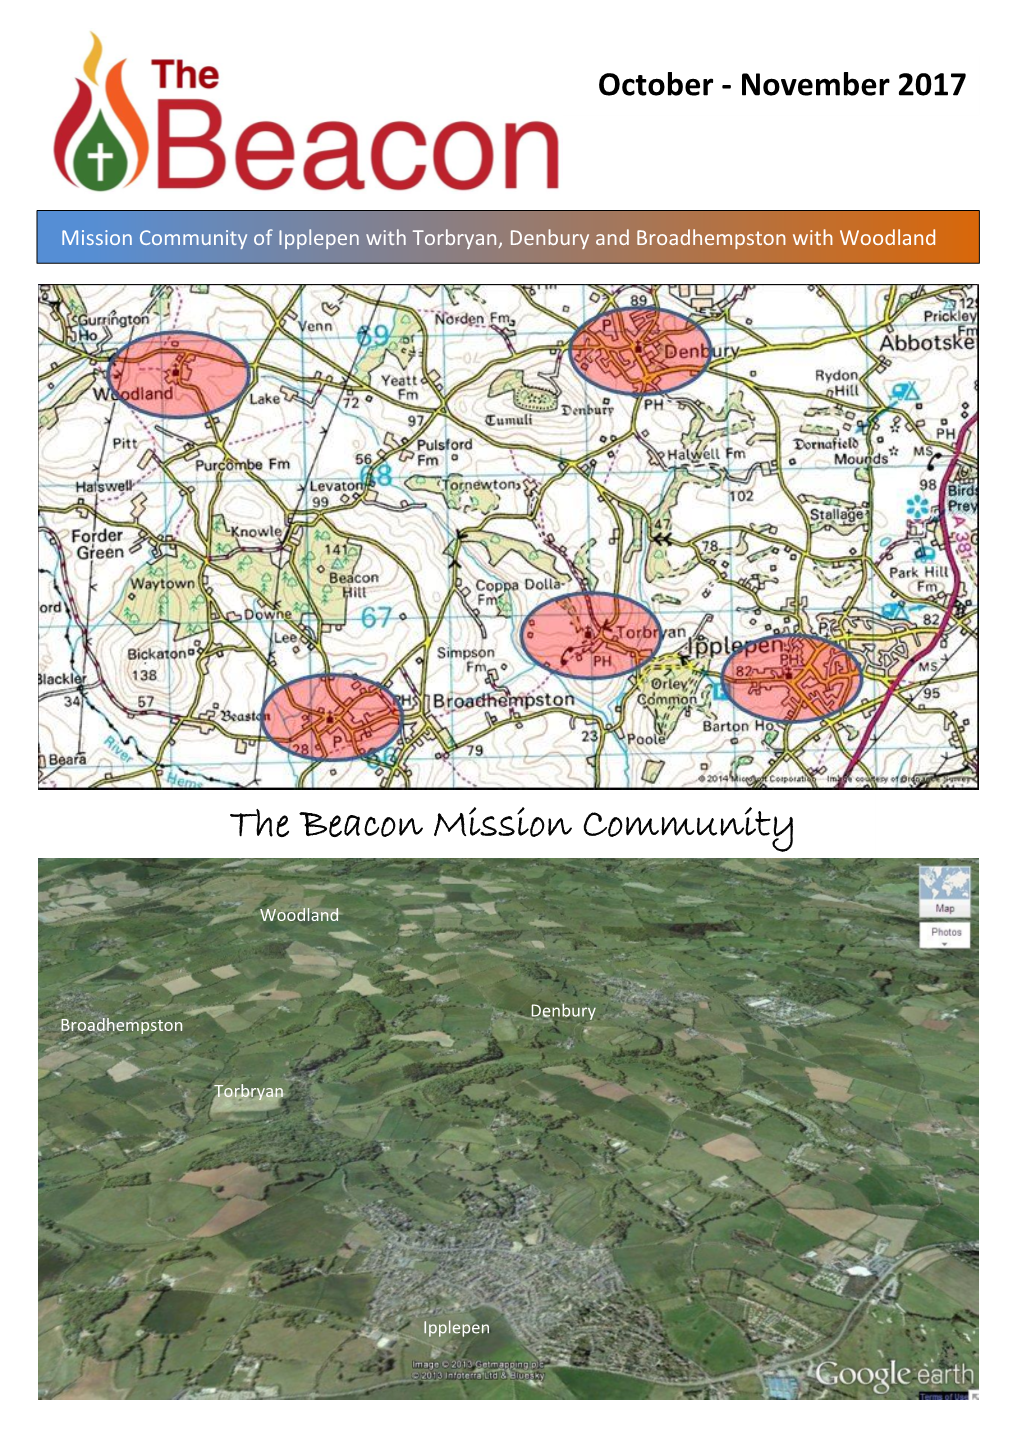 The Beacon Mission Community